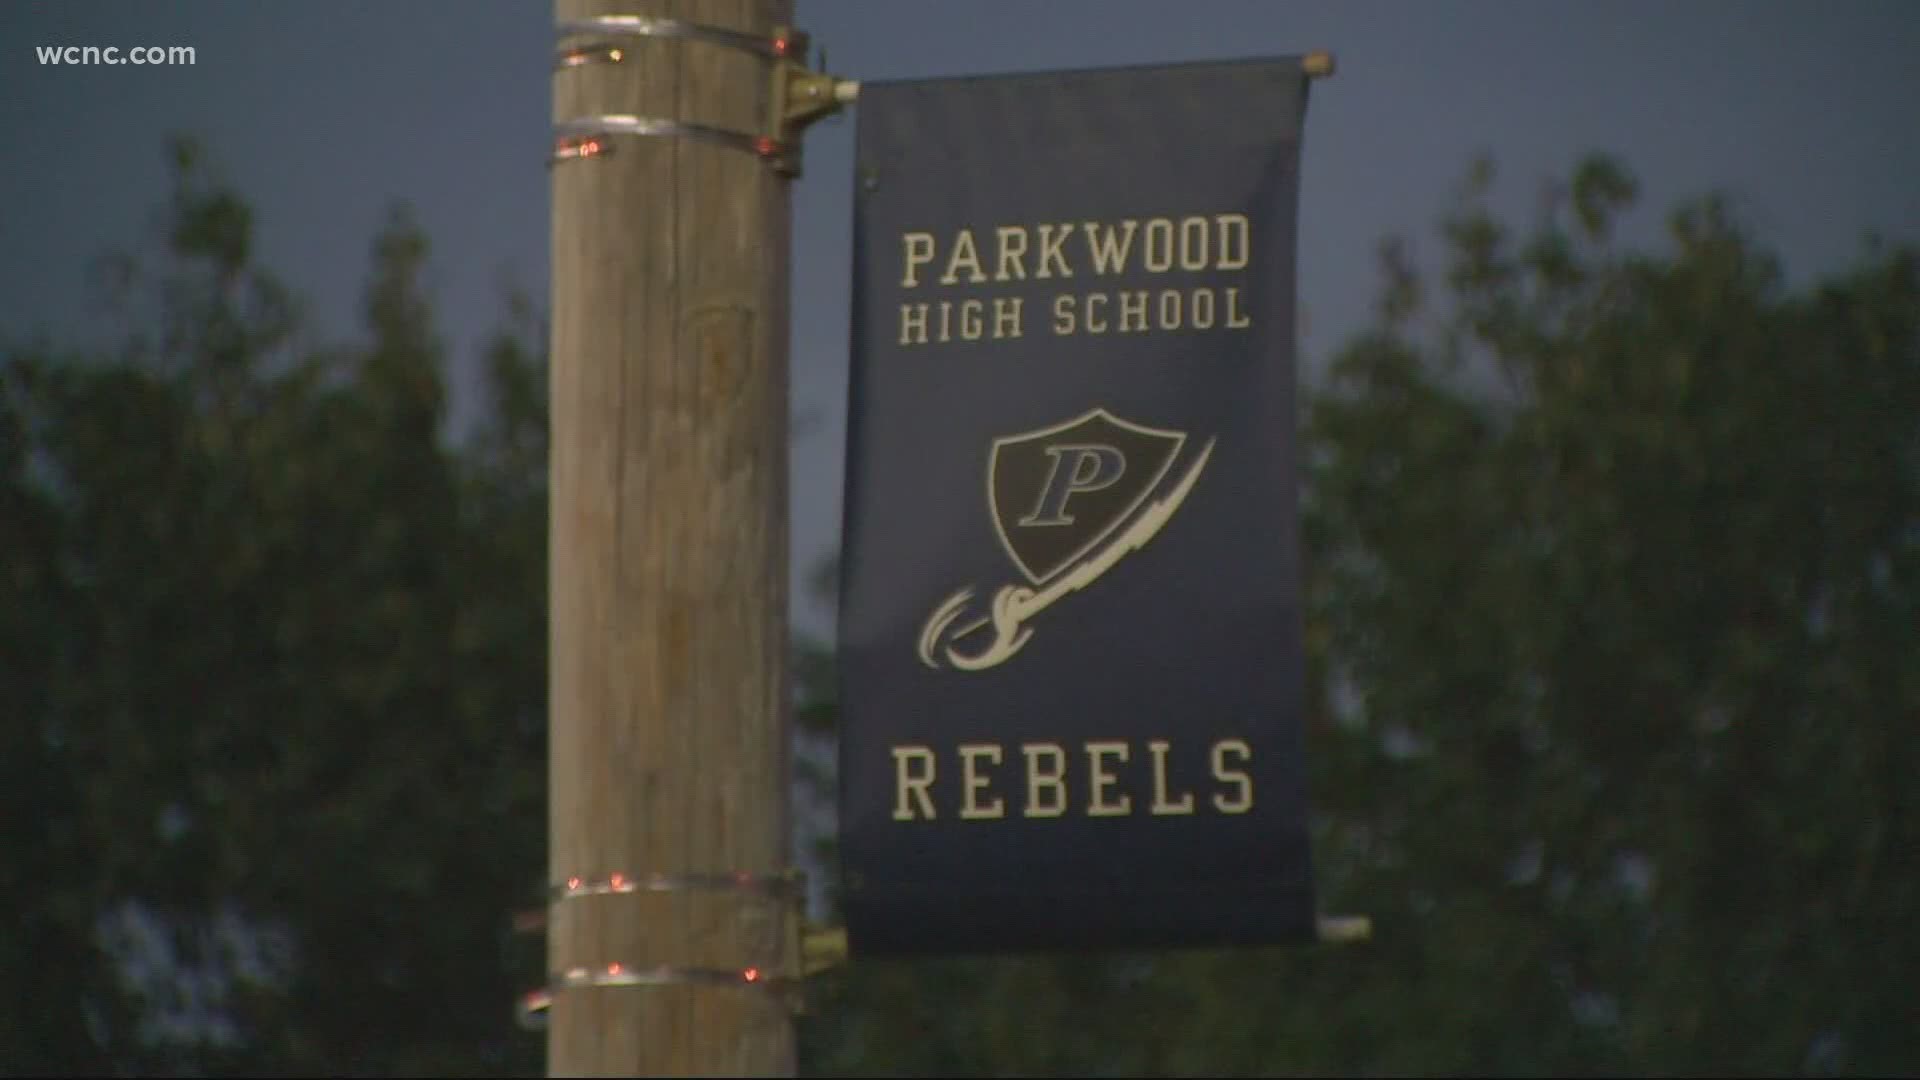 For years Parkwood High School in Union County has carried the "rebel" name as the school mascot, but that will soon be changing.